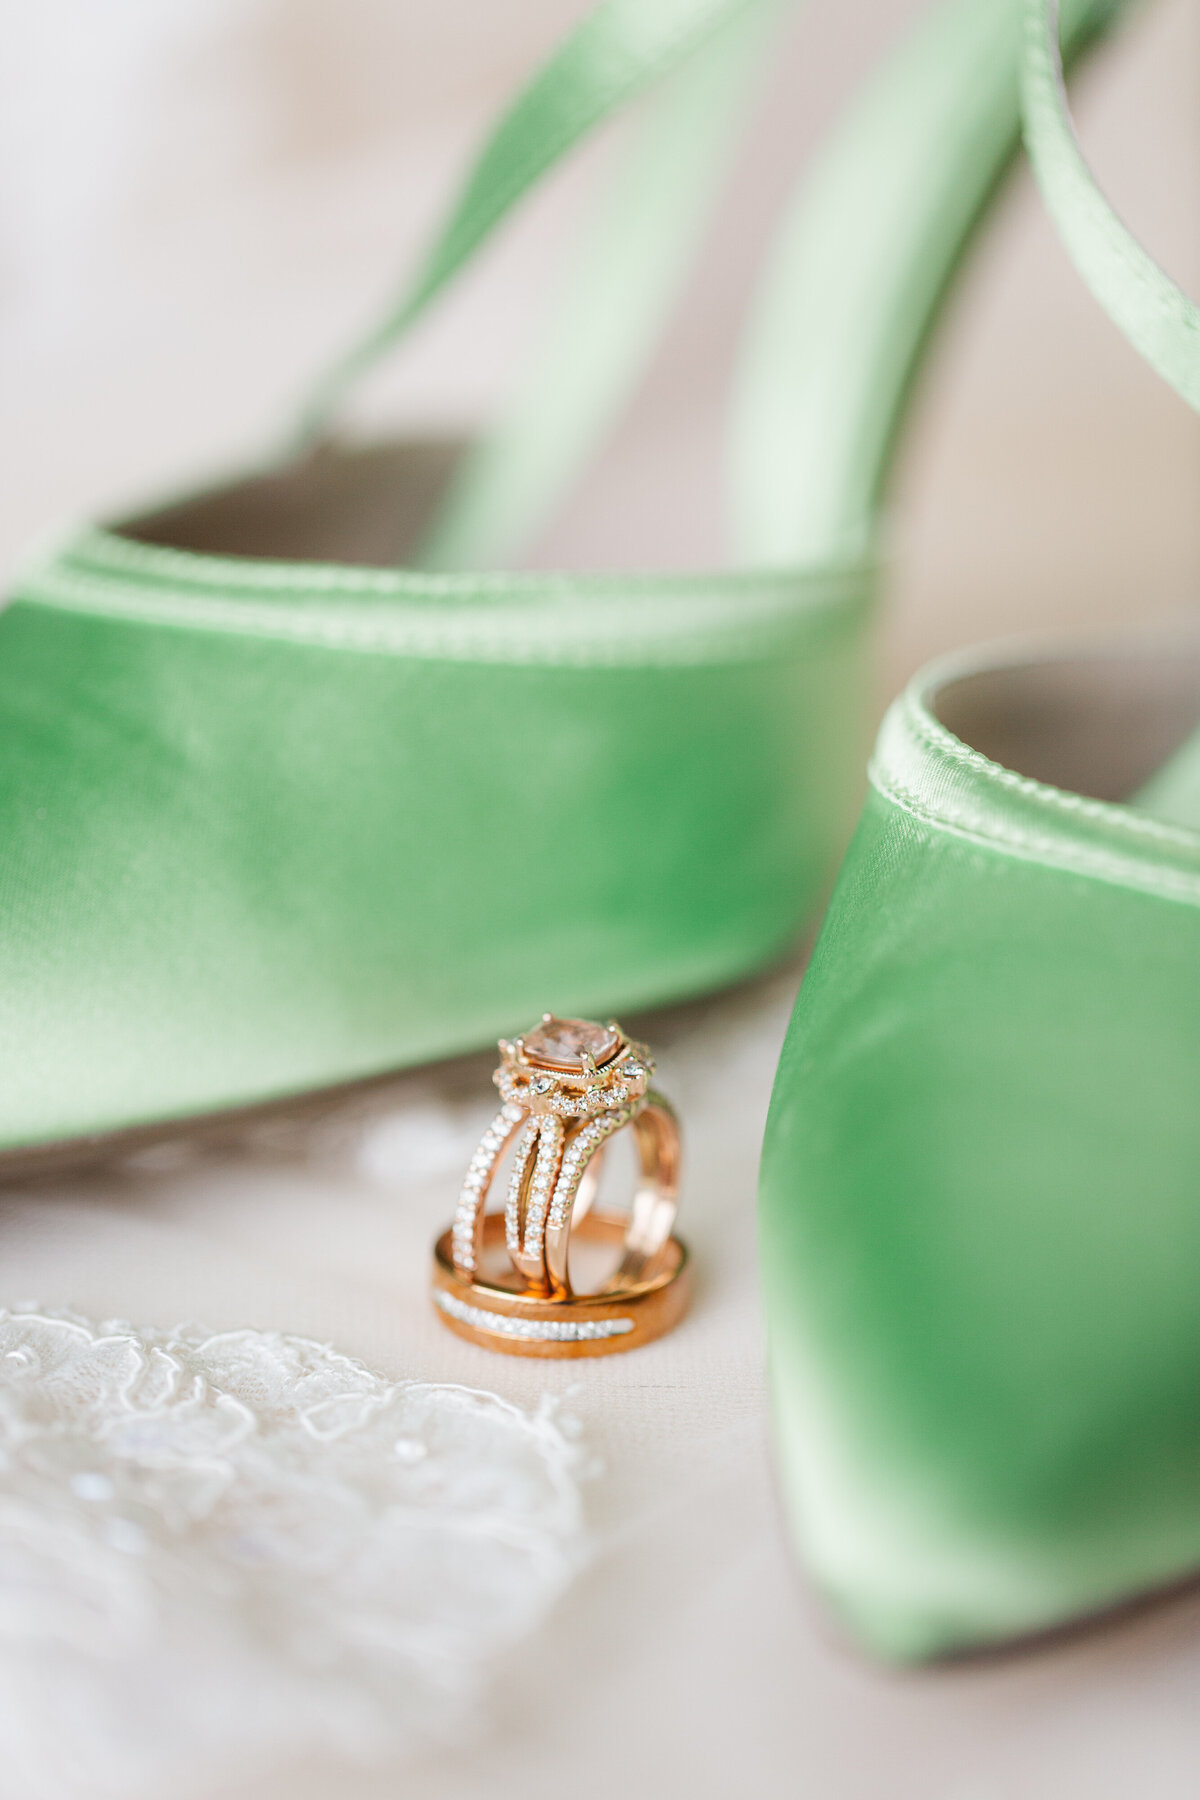 green satin wedding shoes with rose gold wedding rings nestled between them